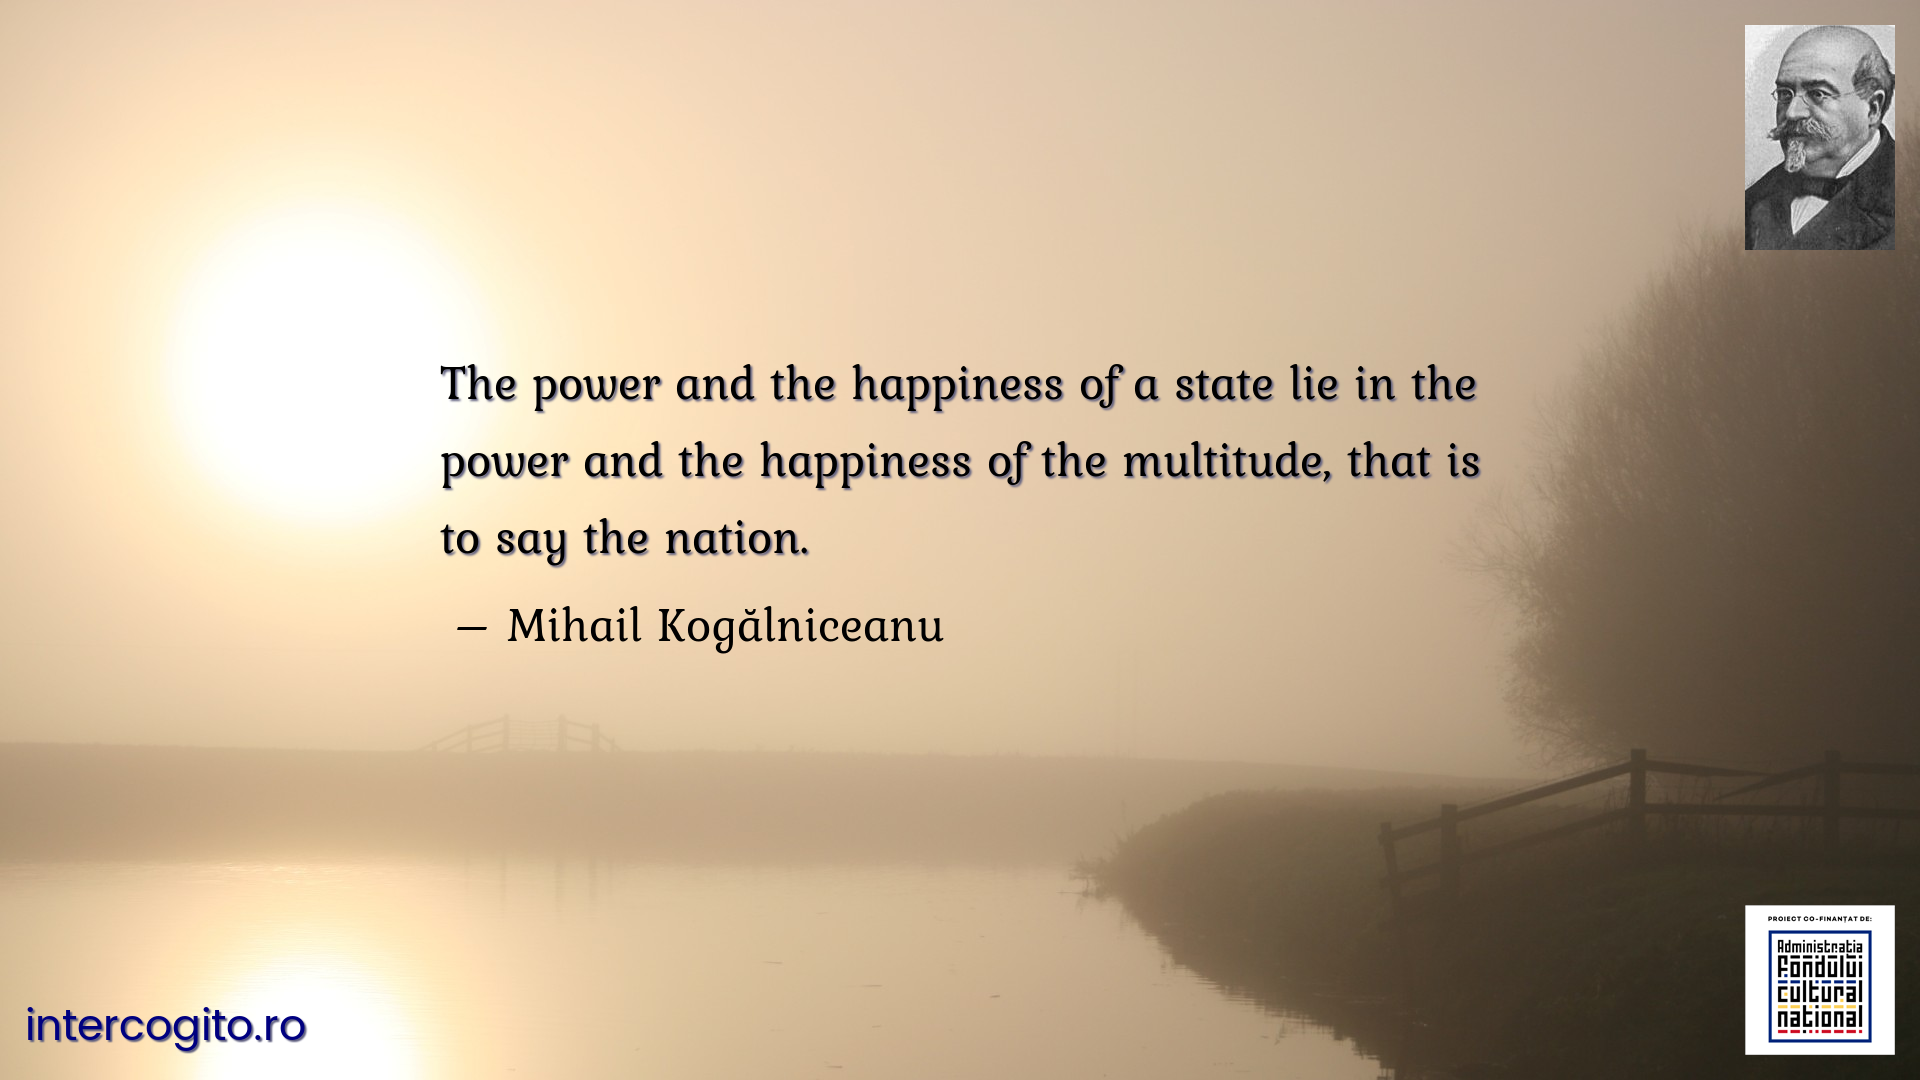 The power and the happiness of a state lie in the power and the happiness of the multitude, that is to say the nation.